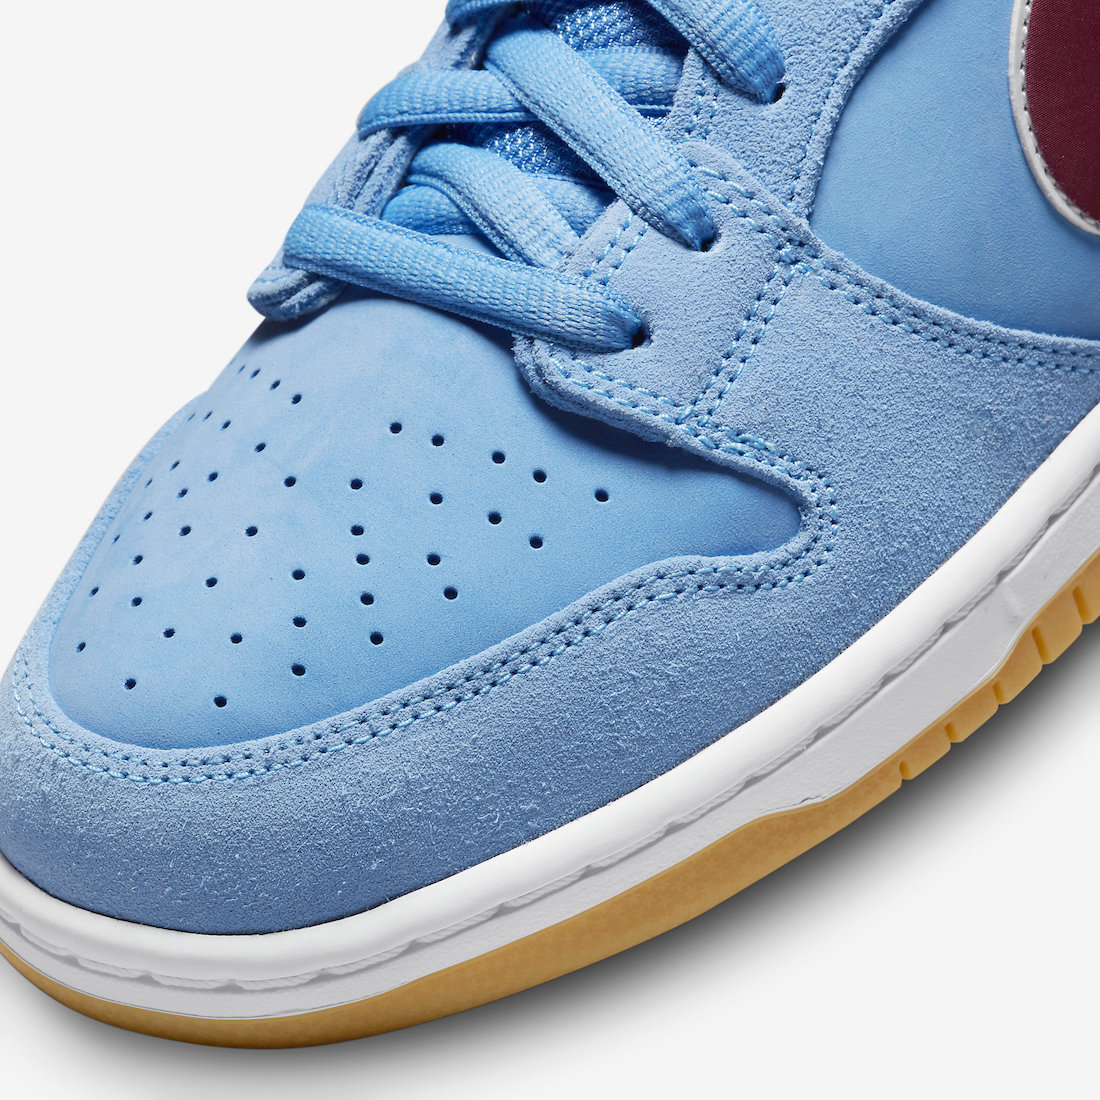 Nike-SB-Dunk-Low-Phillies-DQ4040-400-Release-Date-6